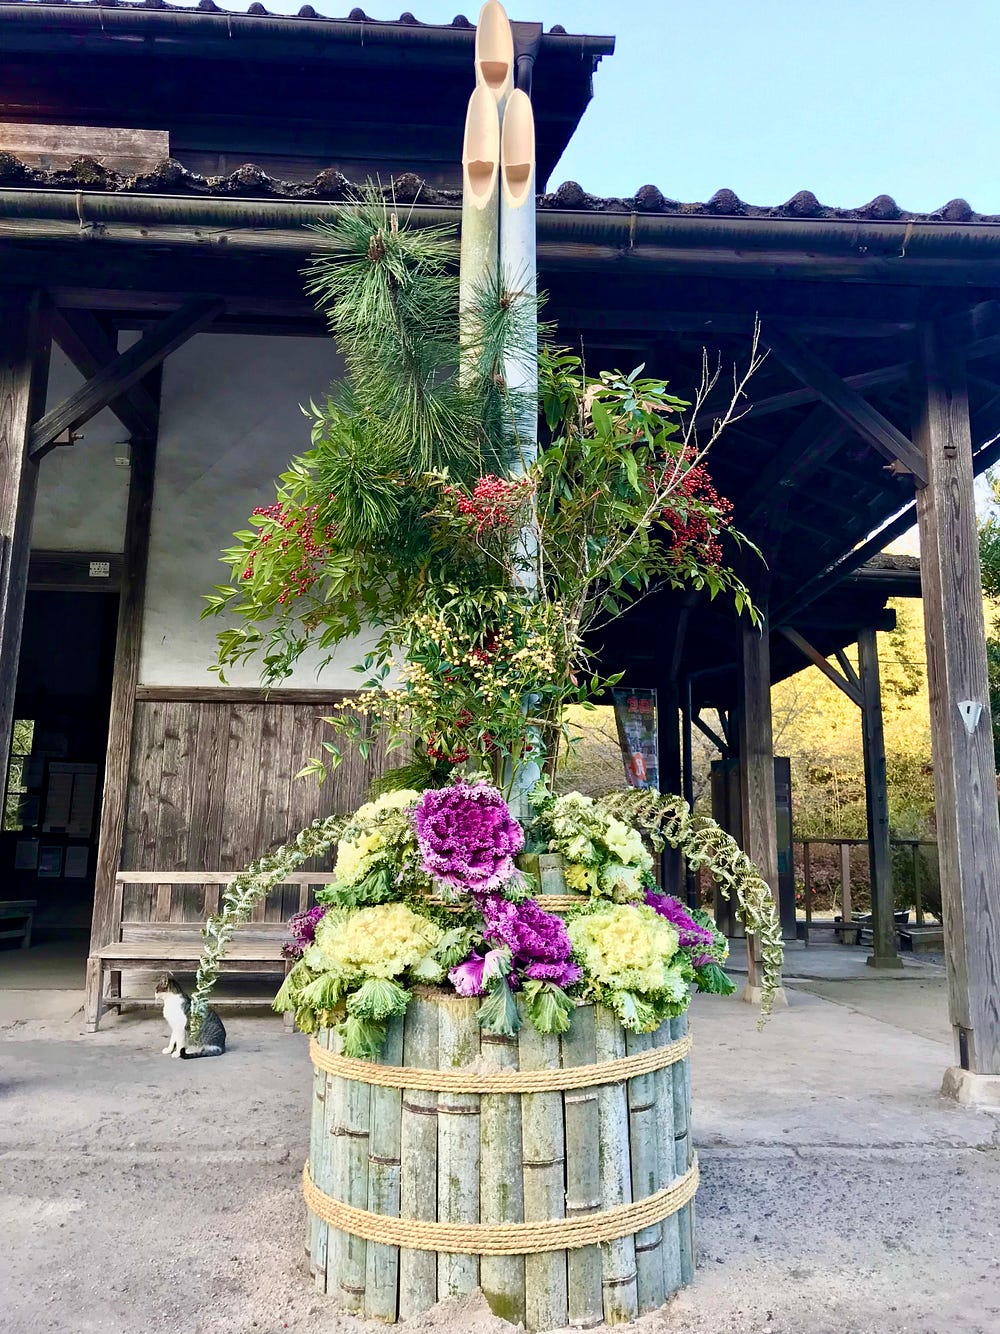 New Year's decoration called Kadomatsu. Three tall diagonally cut bamboo stalks surrounded by pine branches, leaves with red berries, ornamental cabbage, and ferns. This stands in front of an old wooden building with open doorway.